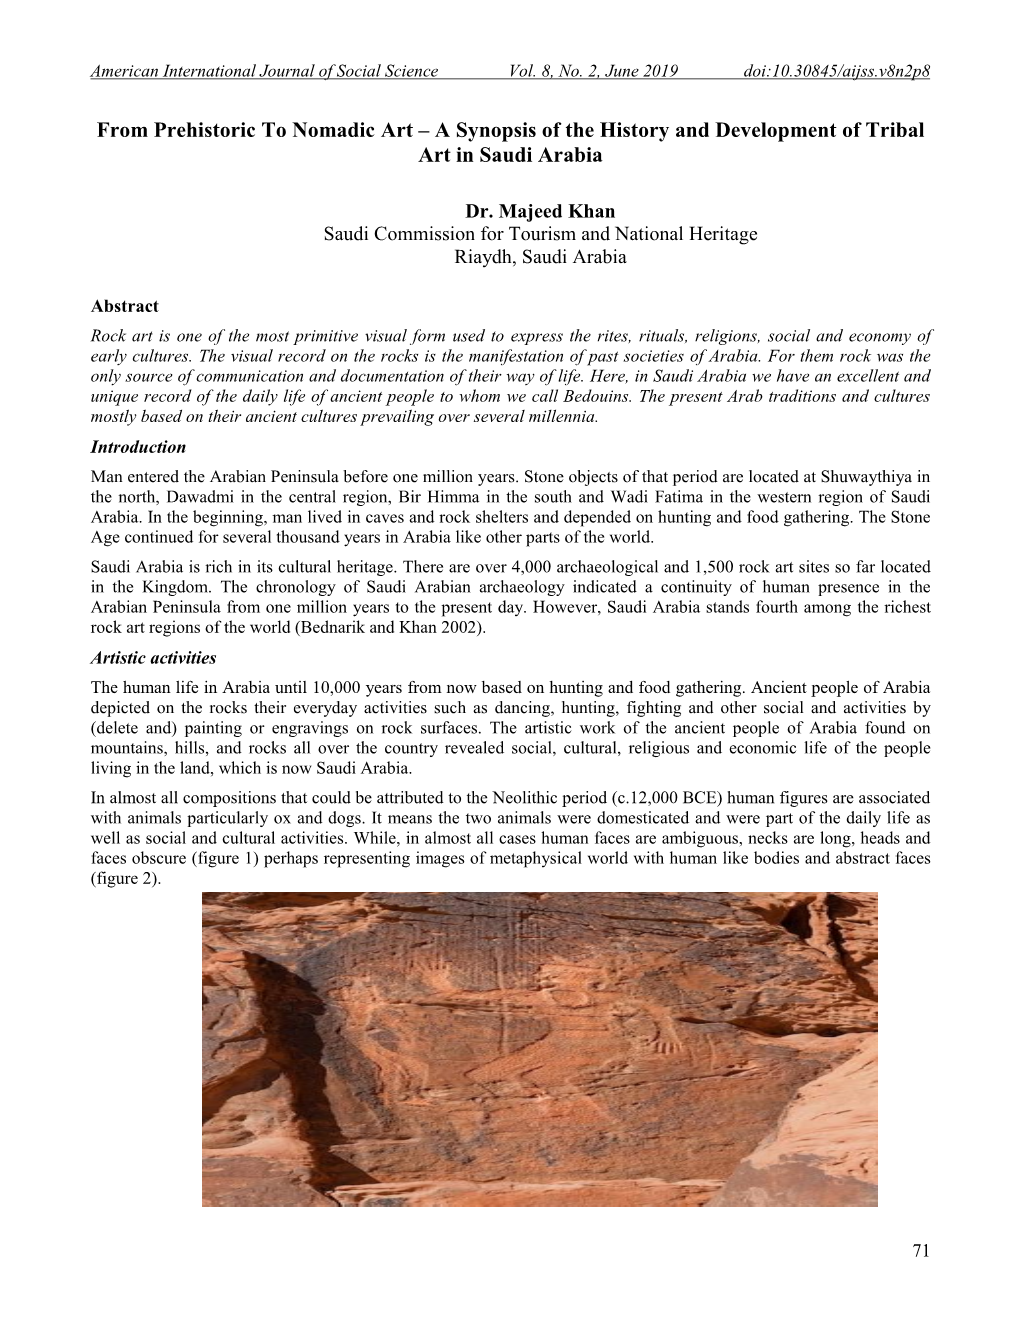 A Synopsis of the History and Development of Tribal Art in Saudi Arabia